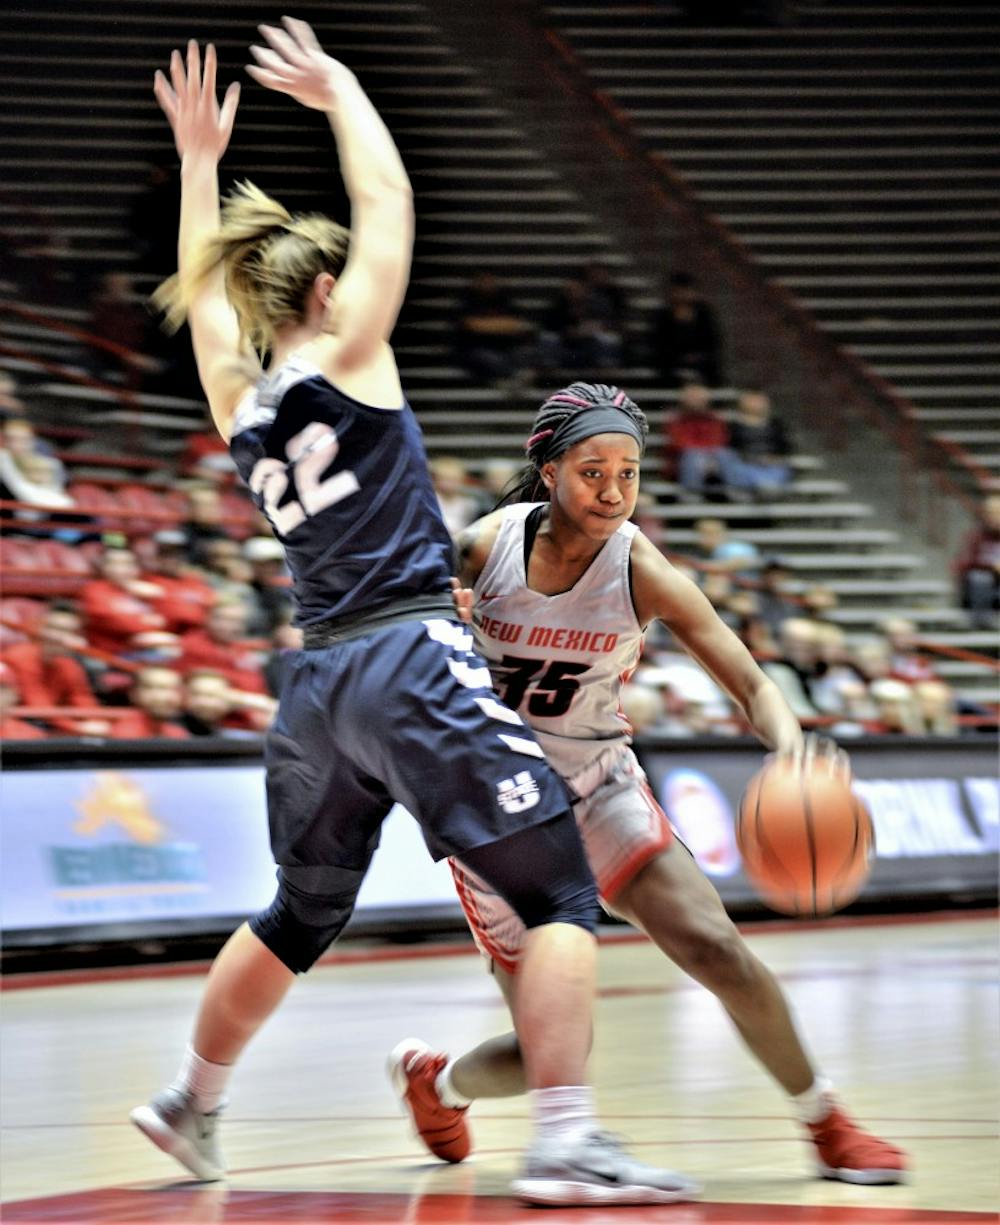 Madi Washington of the New Mexico women's basketball team attempts to drive past Utah State's Rachael Brewster, No. 22, during the third quarter of Wednesday's game between New Mexico and Utah State. The Lobos cruised to an 80-47 victory. &nbsp;